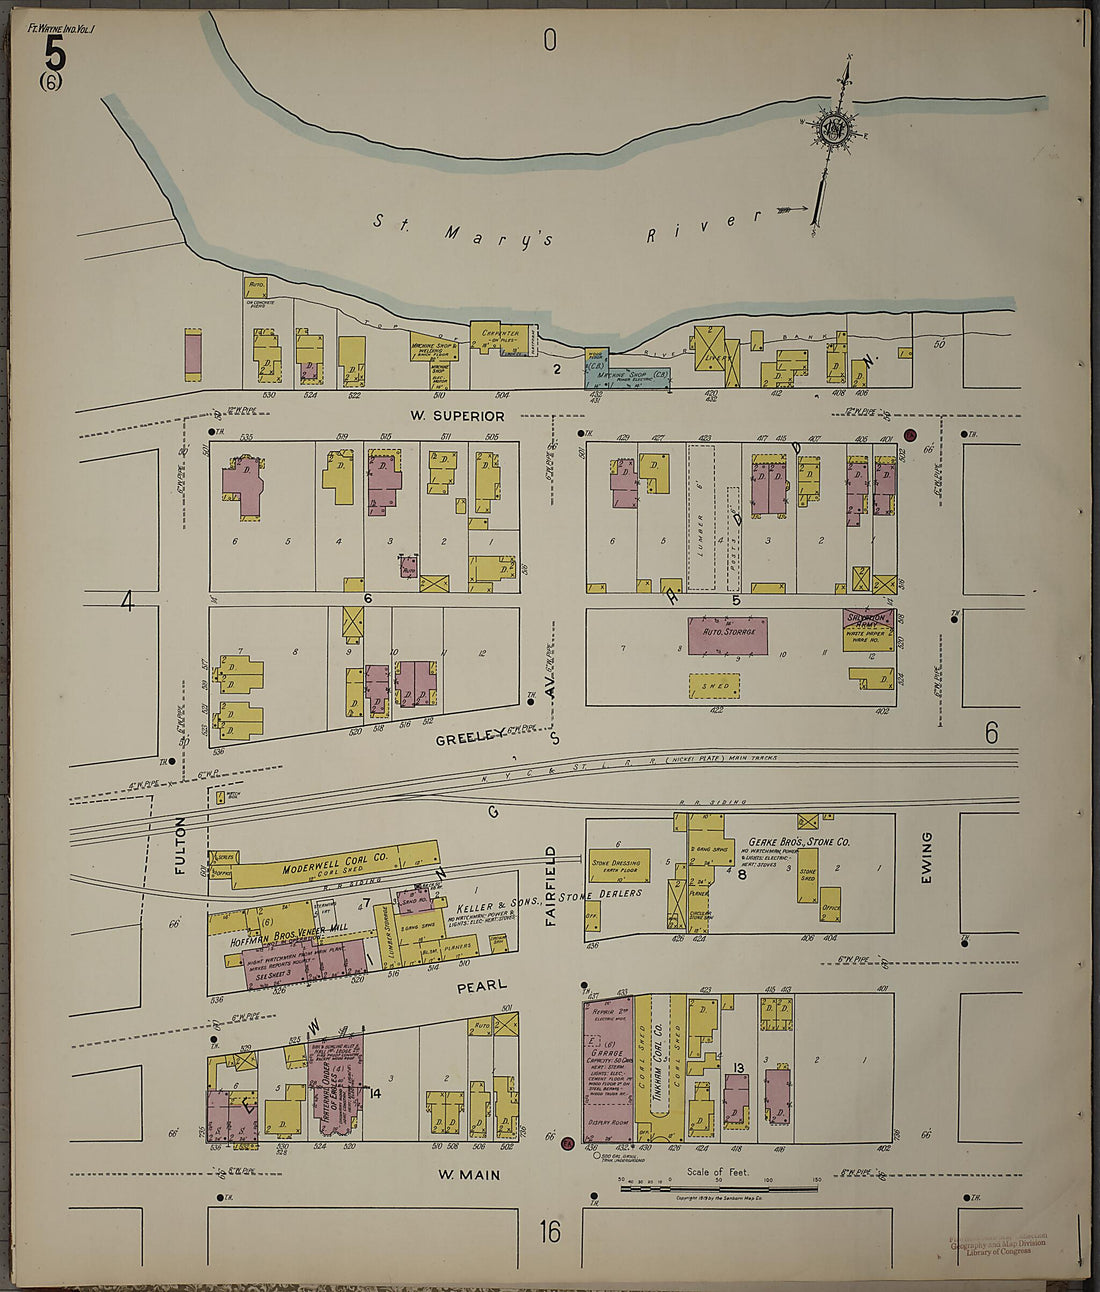 This old map of Fort Wayne, Allen County, Indiana was created by Sanborn Map Company in 1918